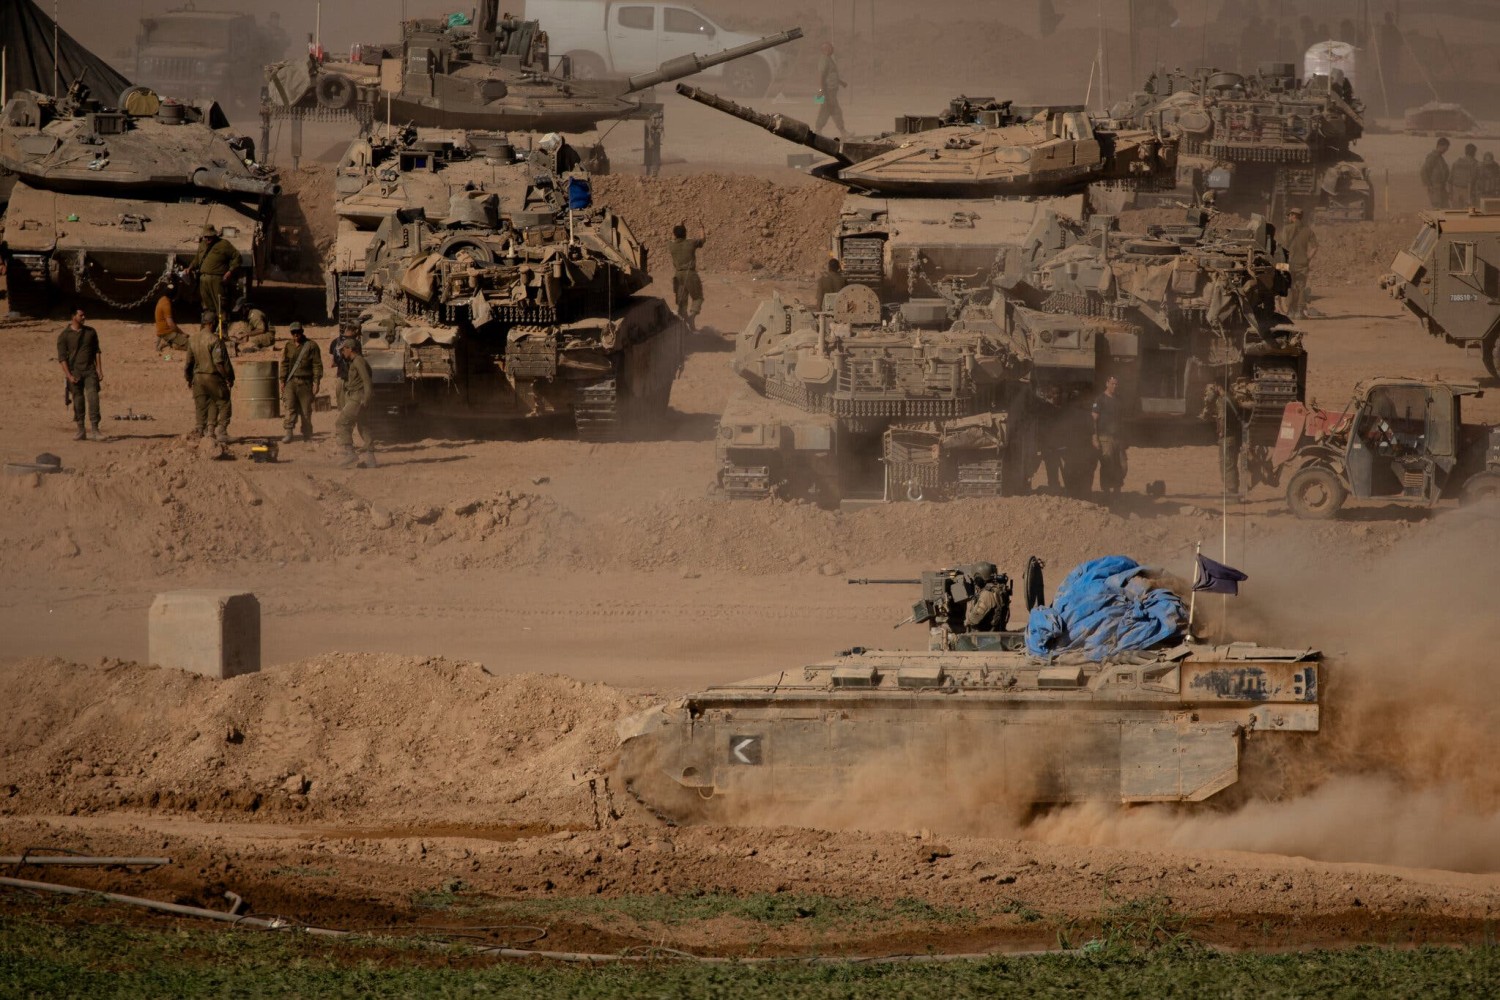 Israel’s Claim of Control Over Border Zone Risks Raising Tensions With Egypt